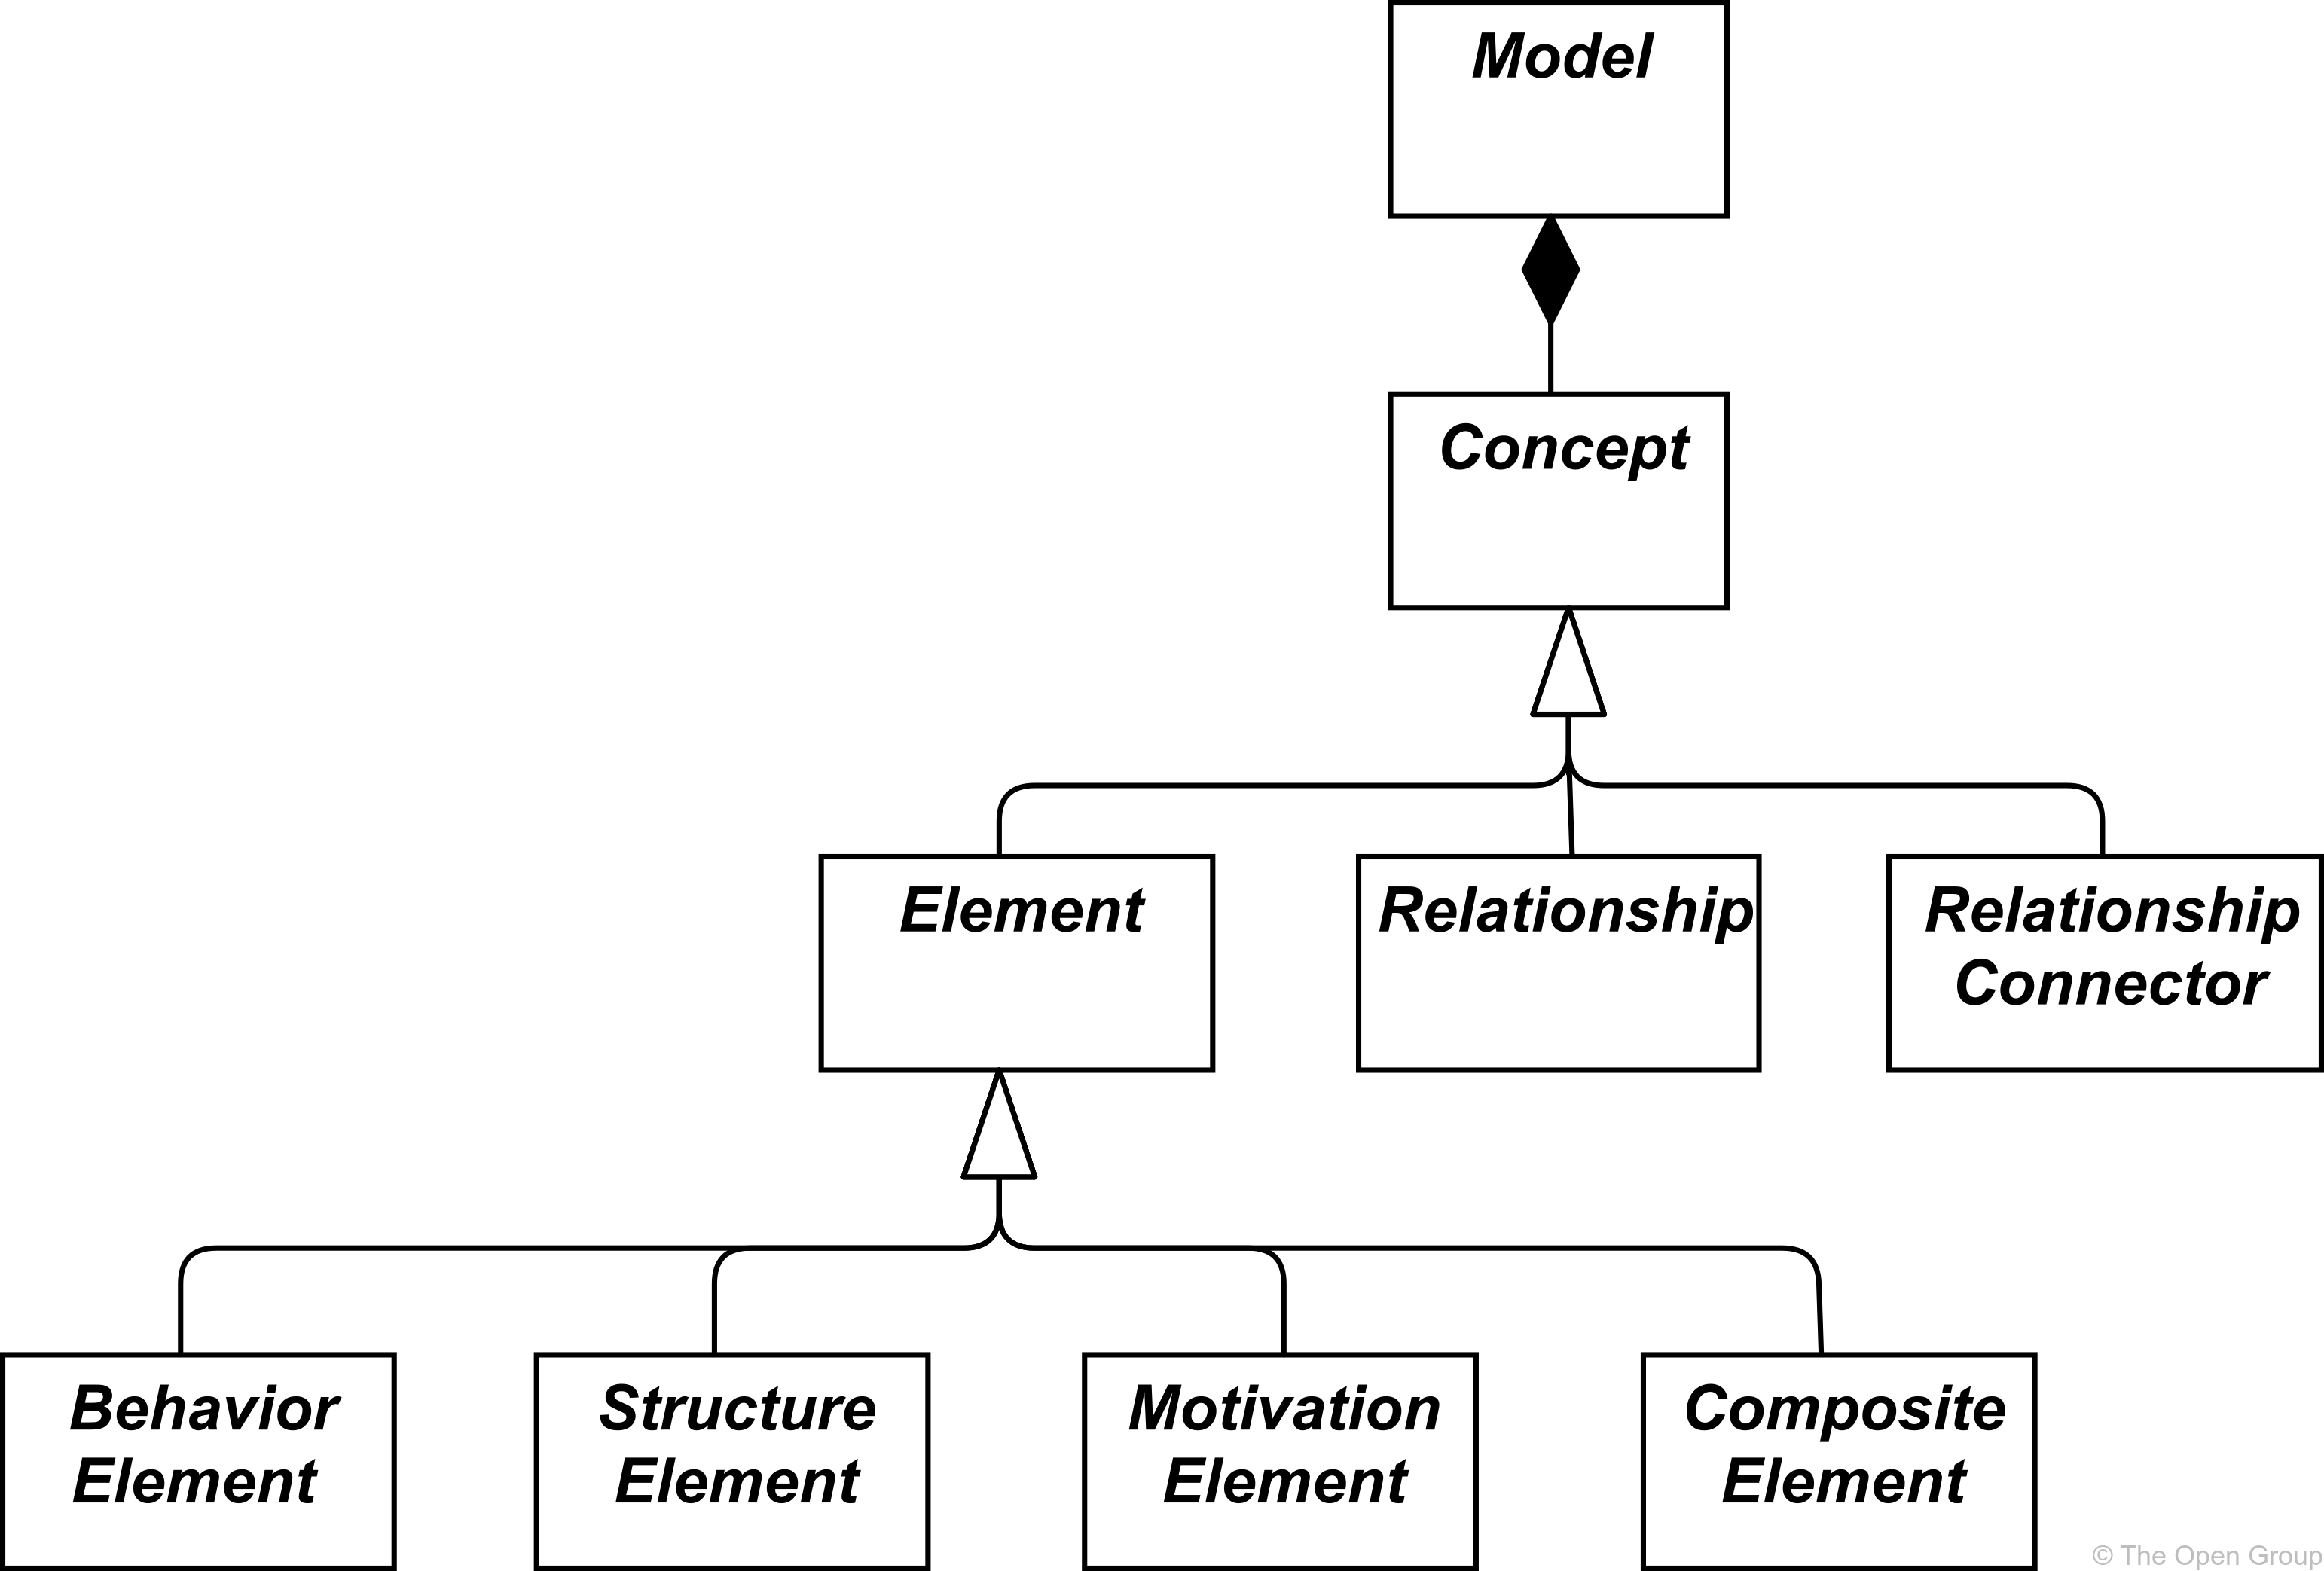 fig Top Level Hierarchy of ArchiMate Concepts